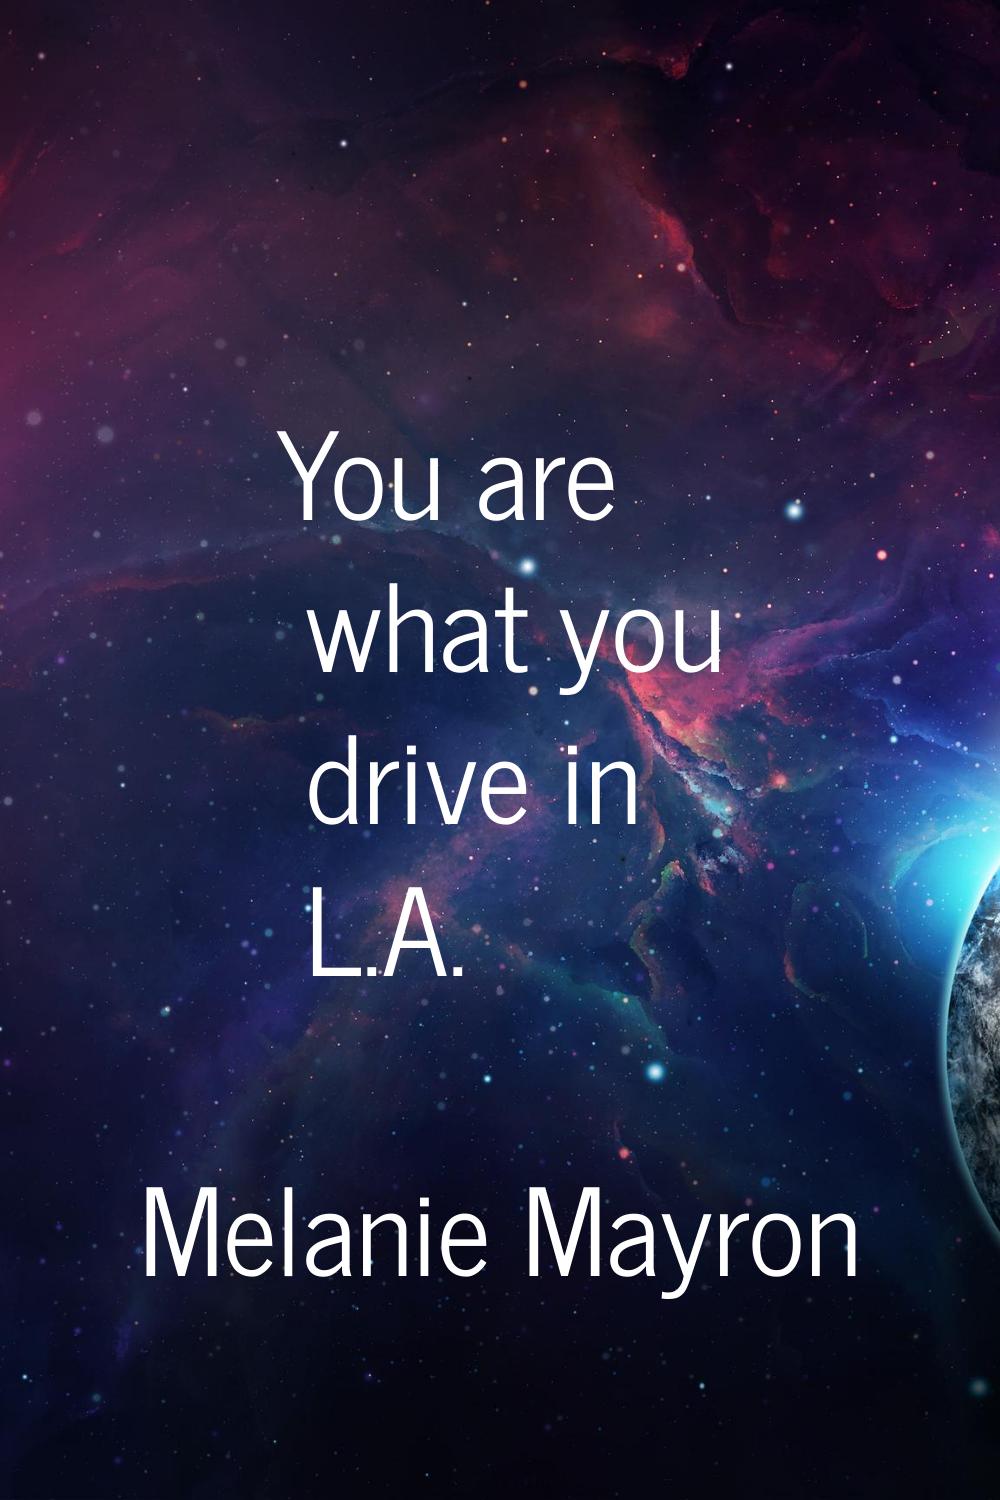 You are what you drive in L.A.